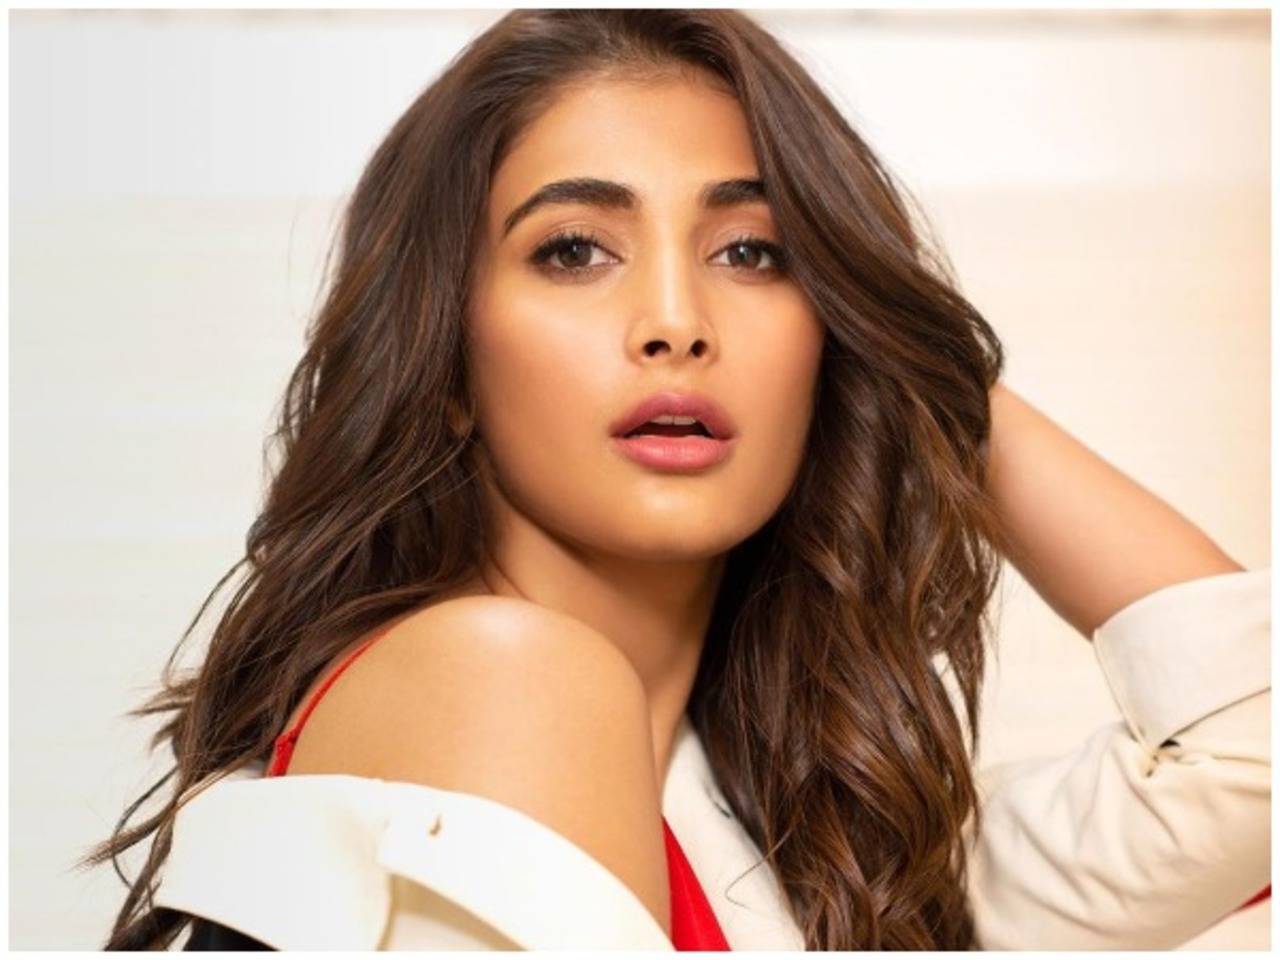 Pooja Hegde As an actress and as a woman, I feel that #MeToo movement should not be taken lightly Hindi Movie News